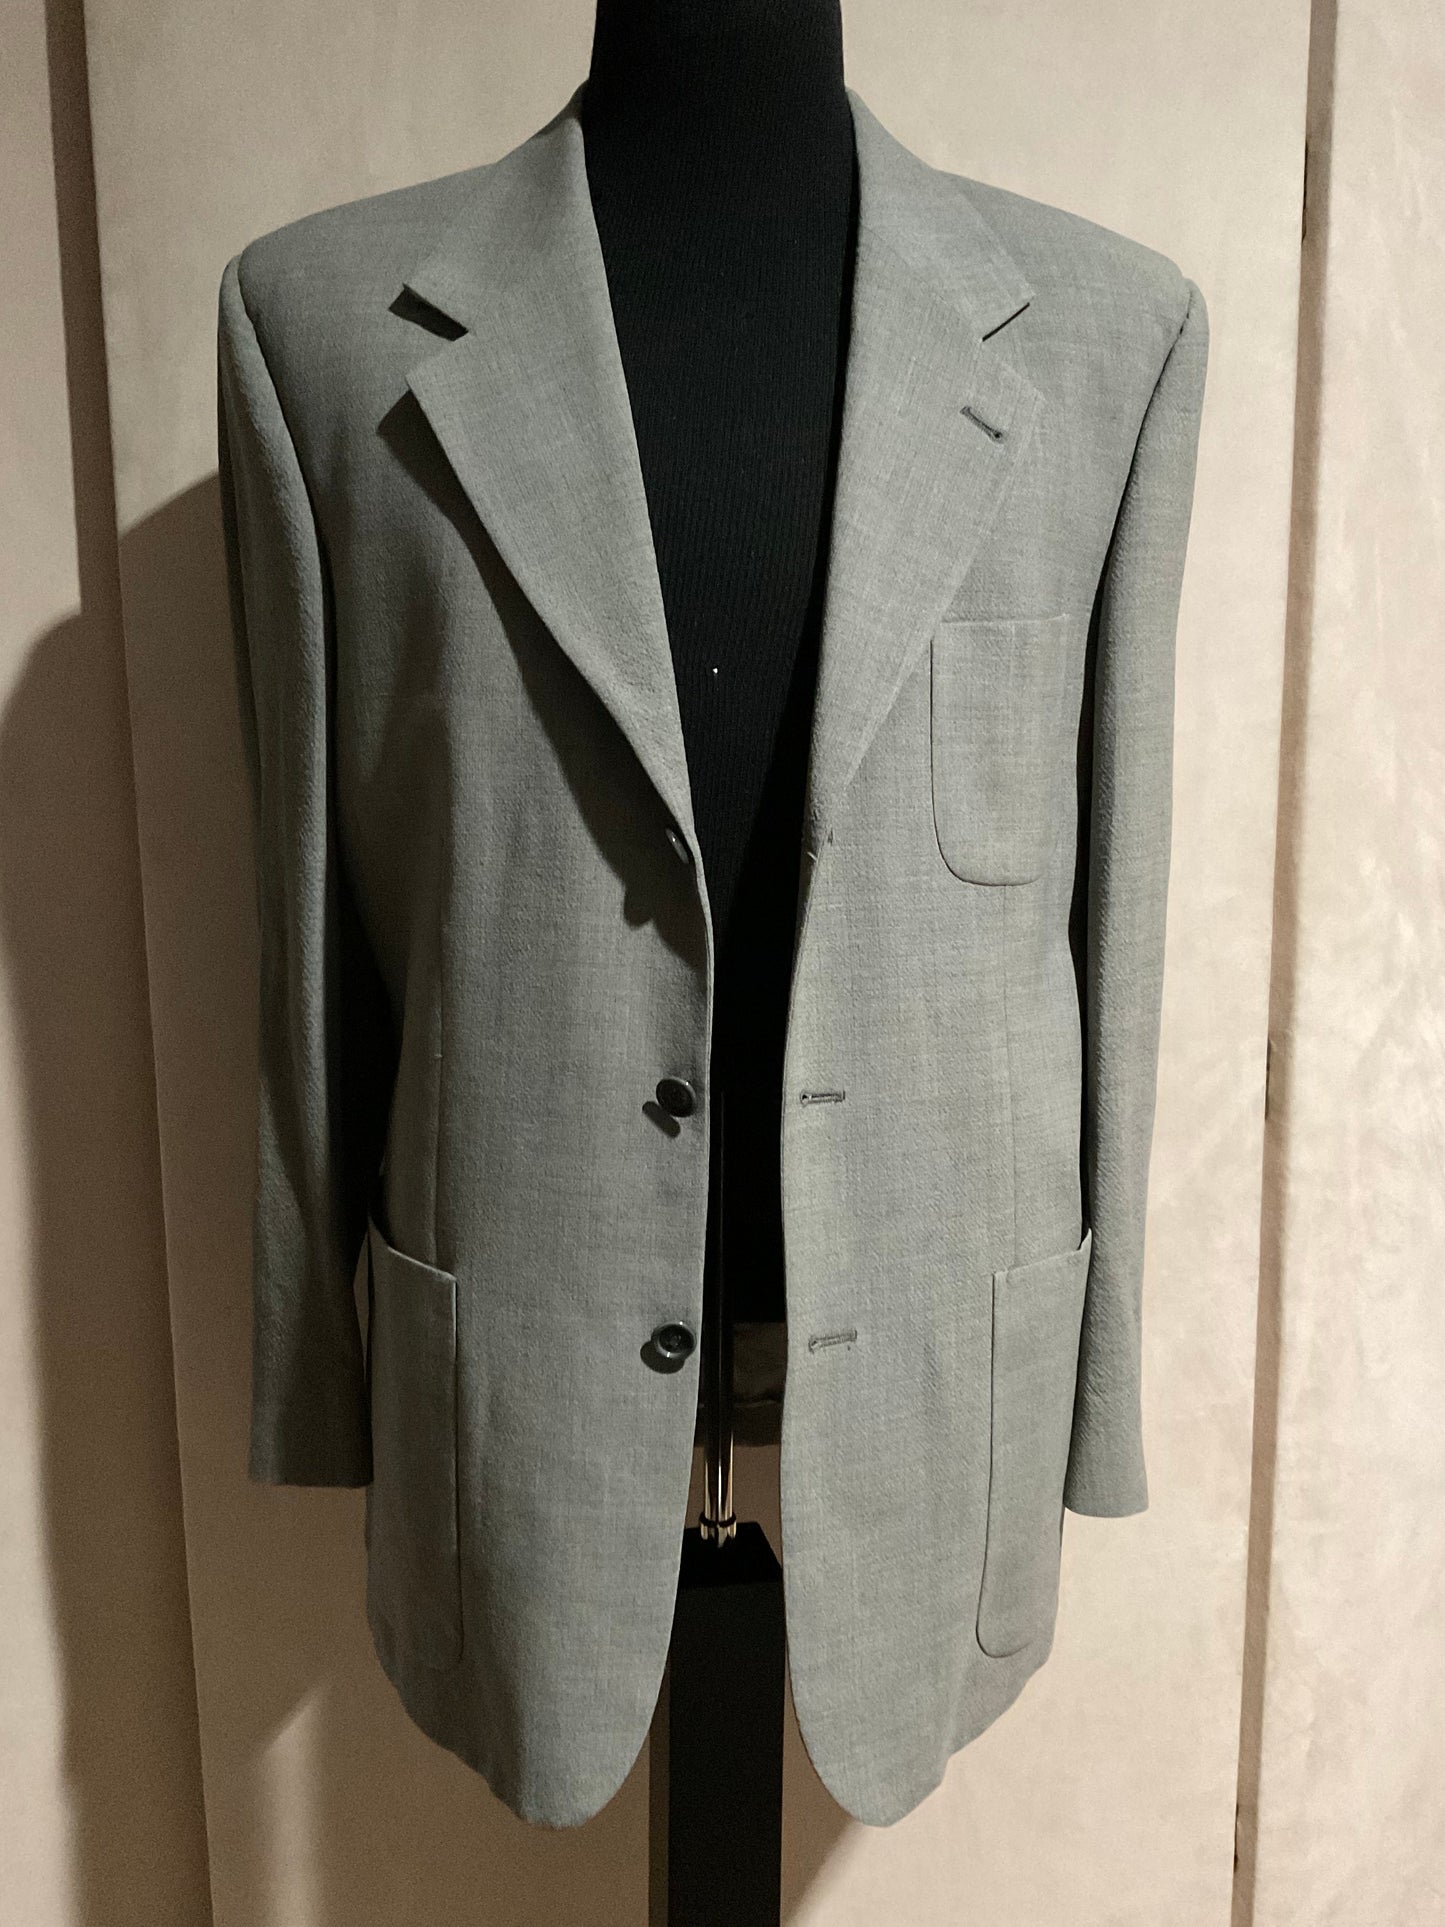 R P SPORT JACKET / GREY / 40 / MADE IN ITALY